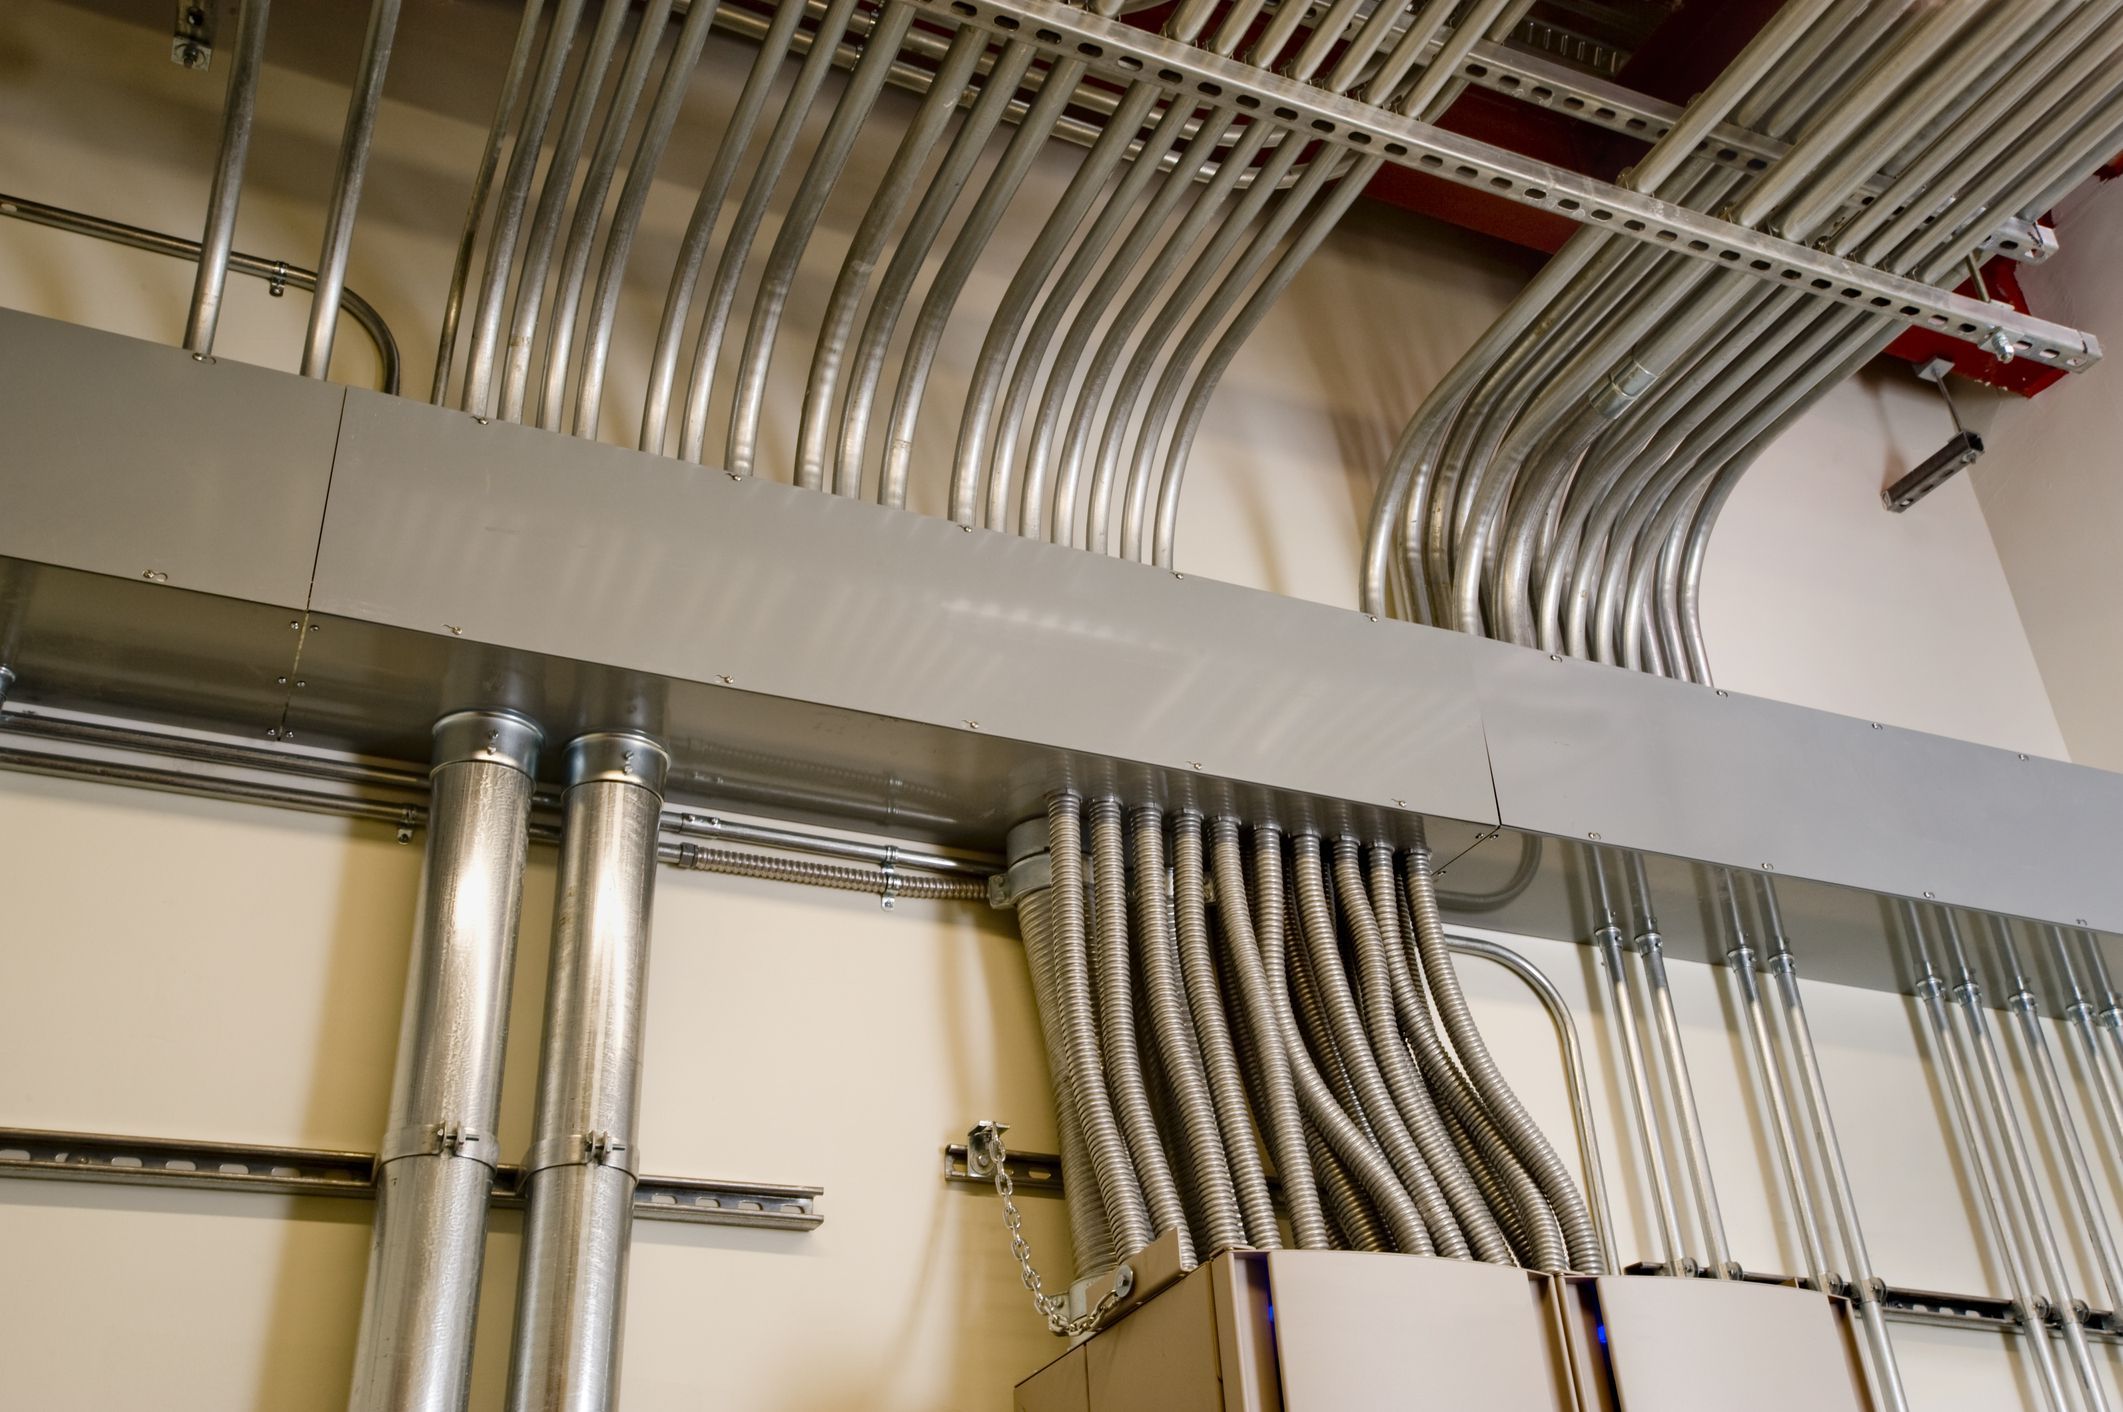 How to choose the right electrical conduits for your home or office?